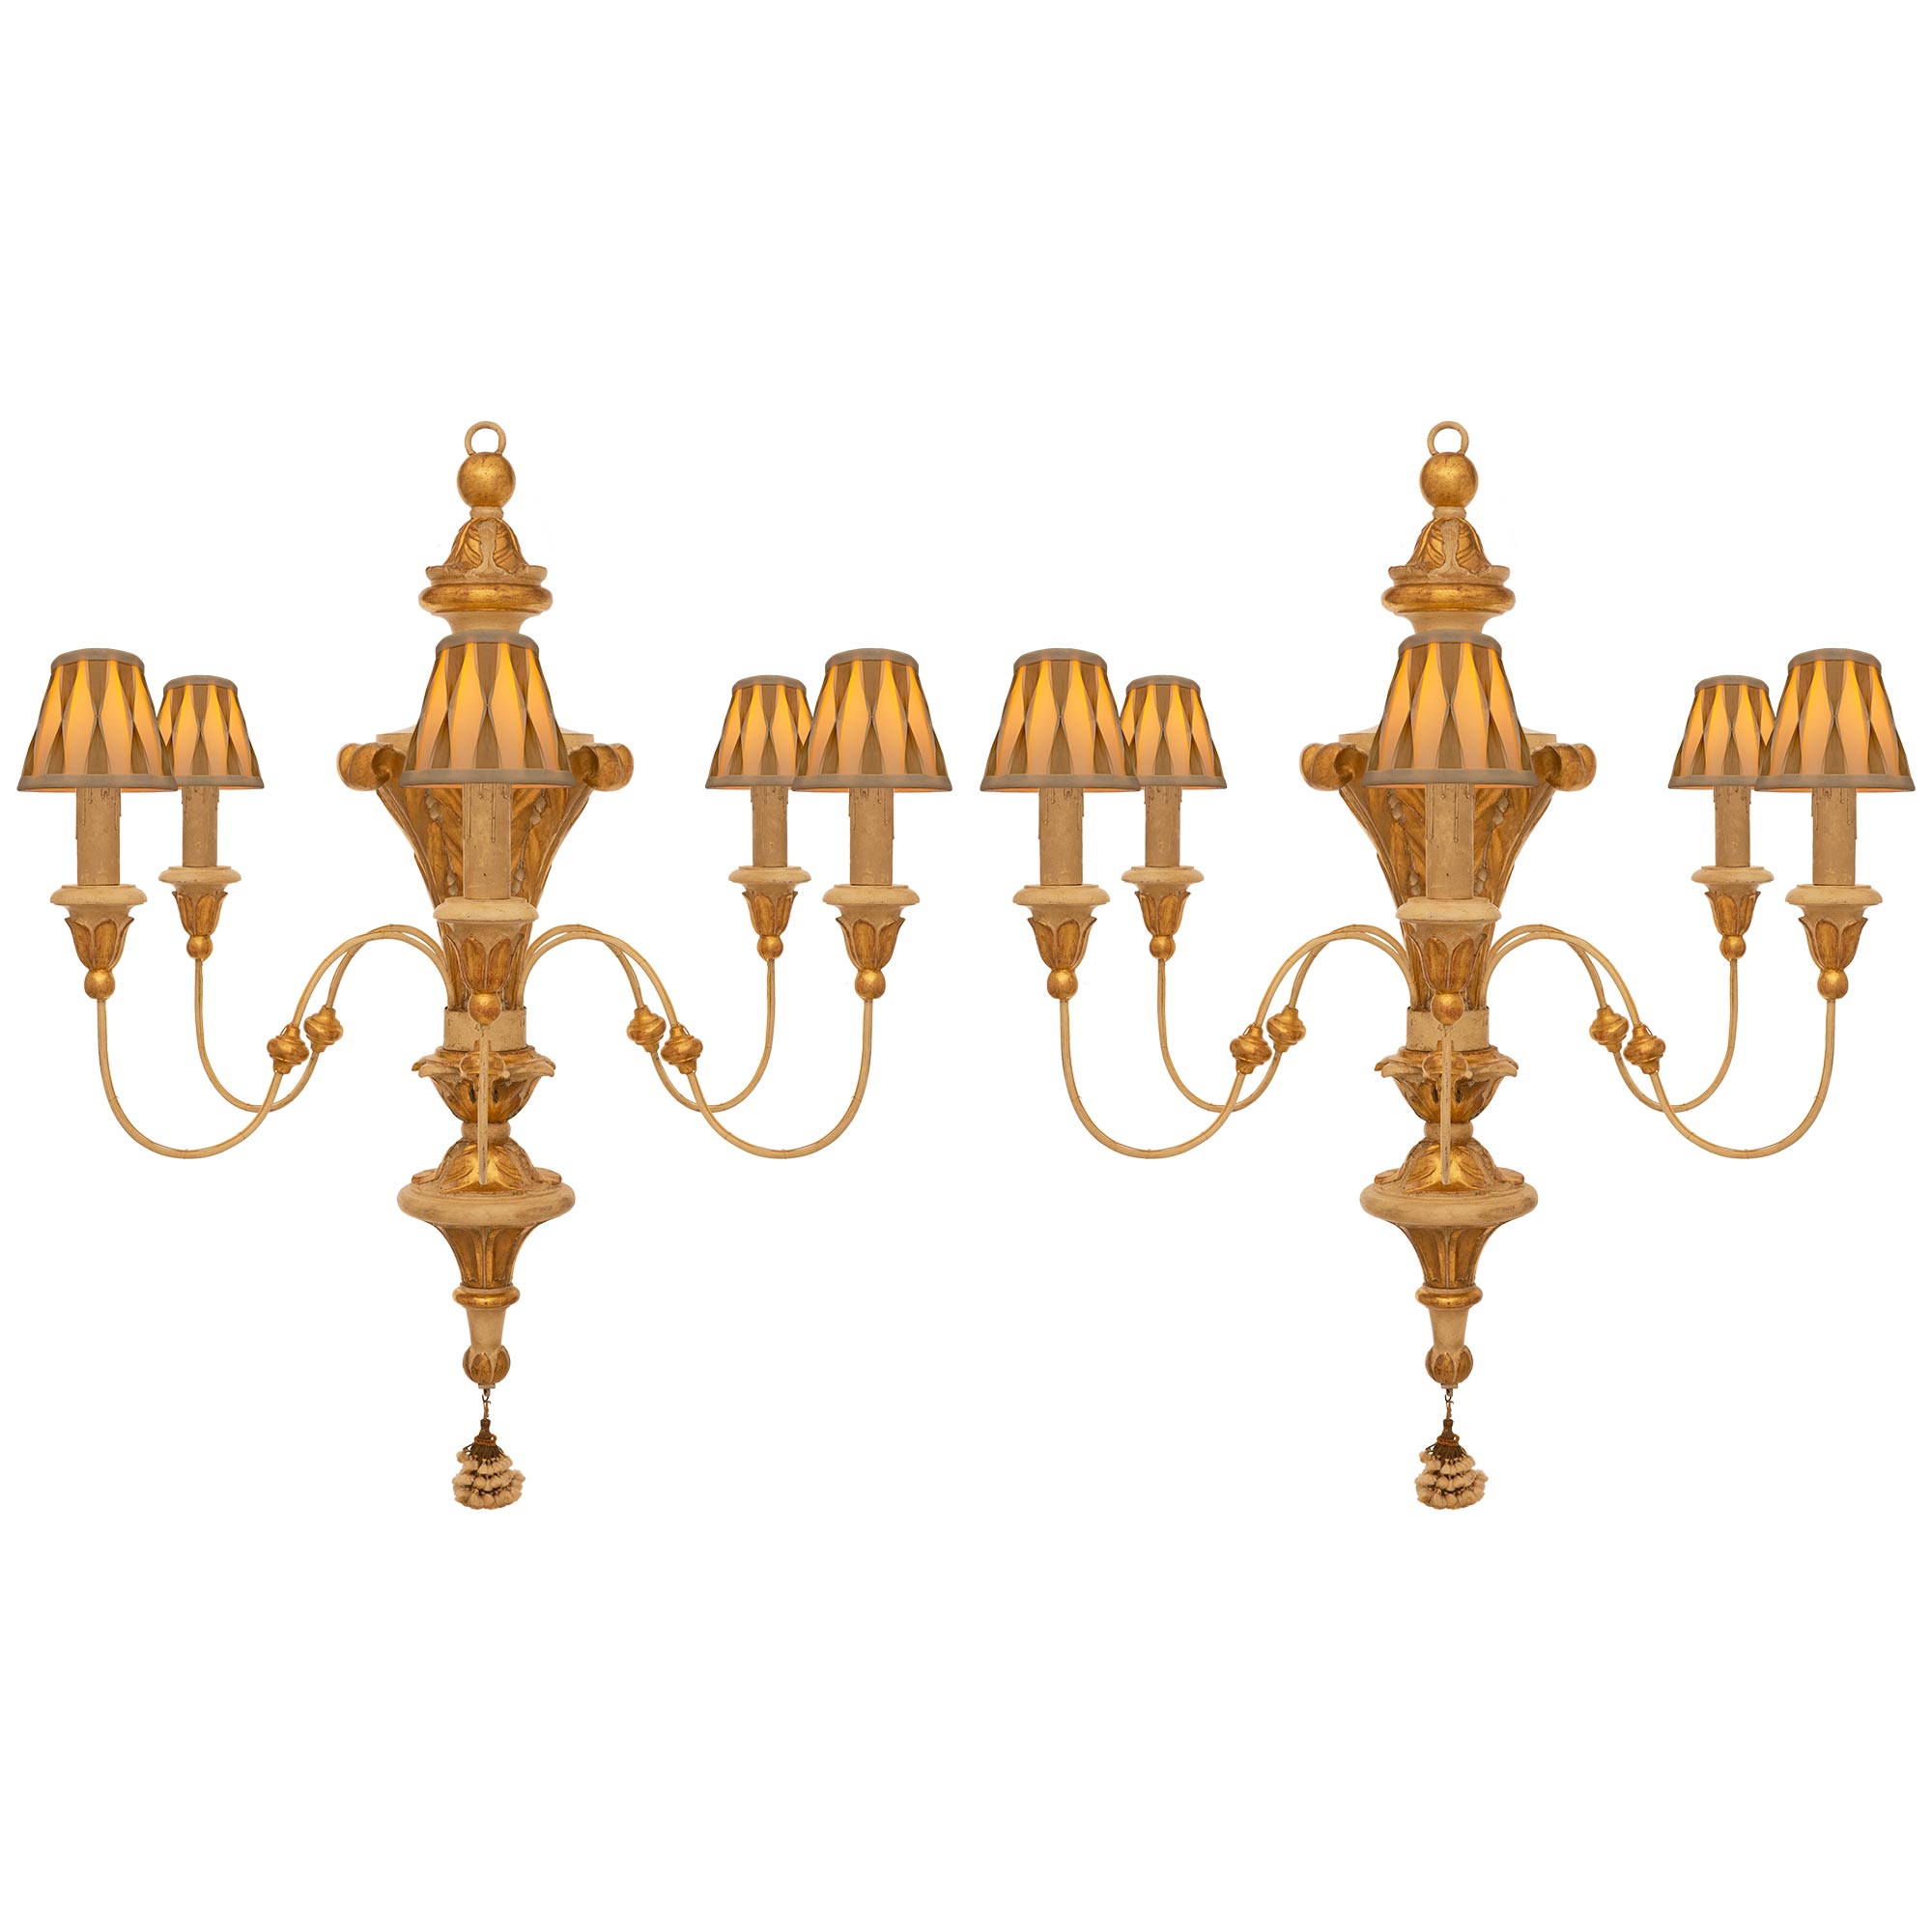 Pair Of Italian 17th Century Louis XIV Period Giltwood Chandeliers For Sale